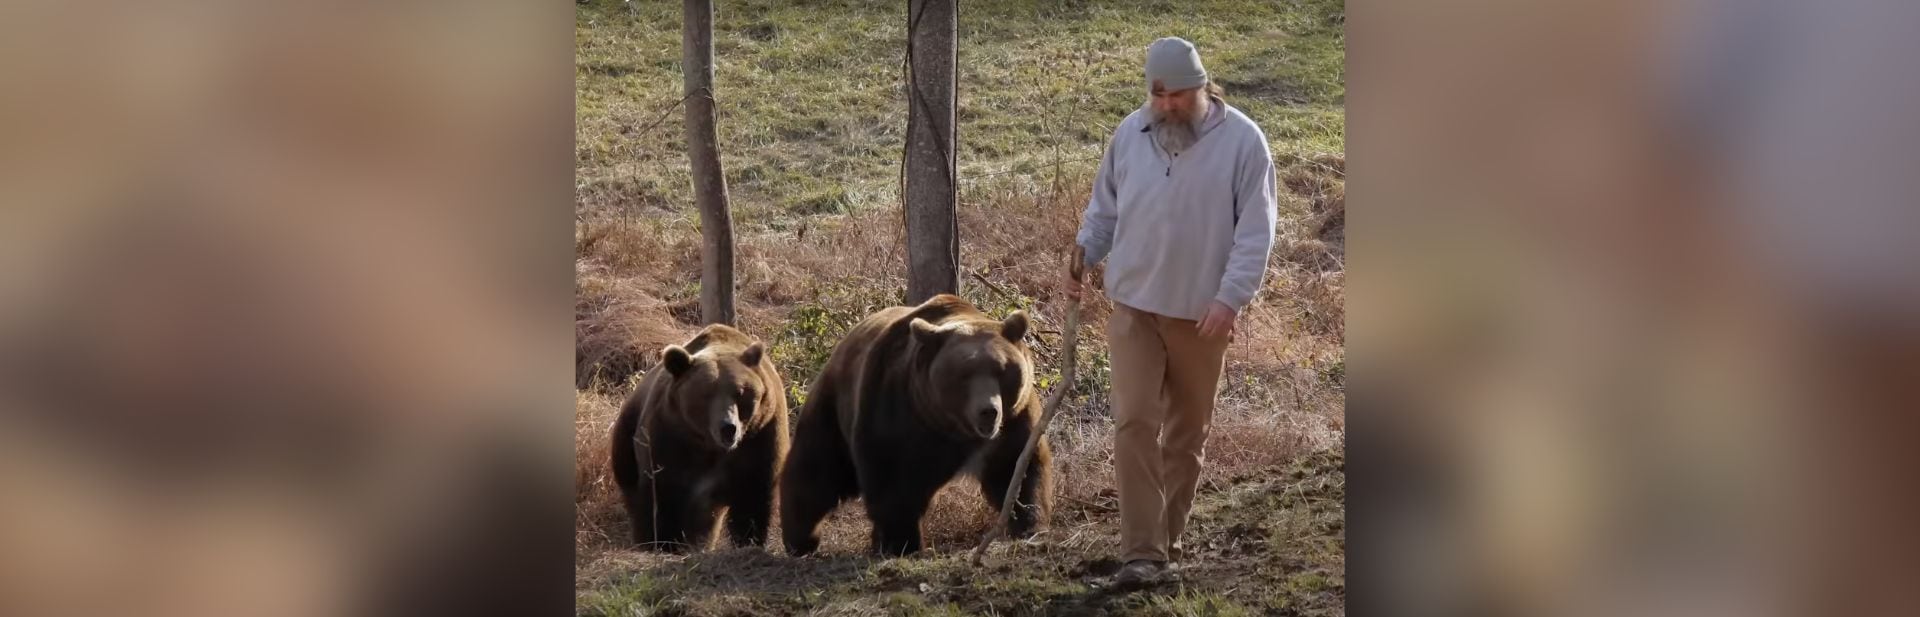 Forget Pet Dogs, This Man Has Two Full-Grown Bears in His Home